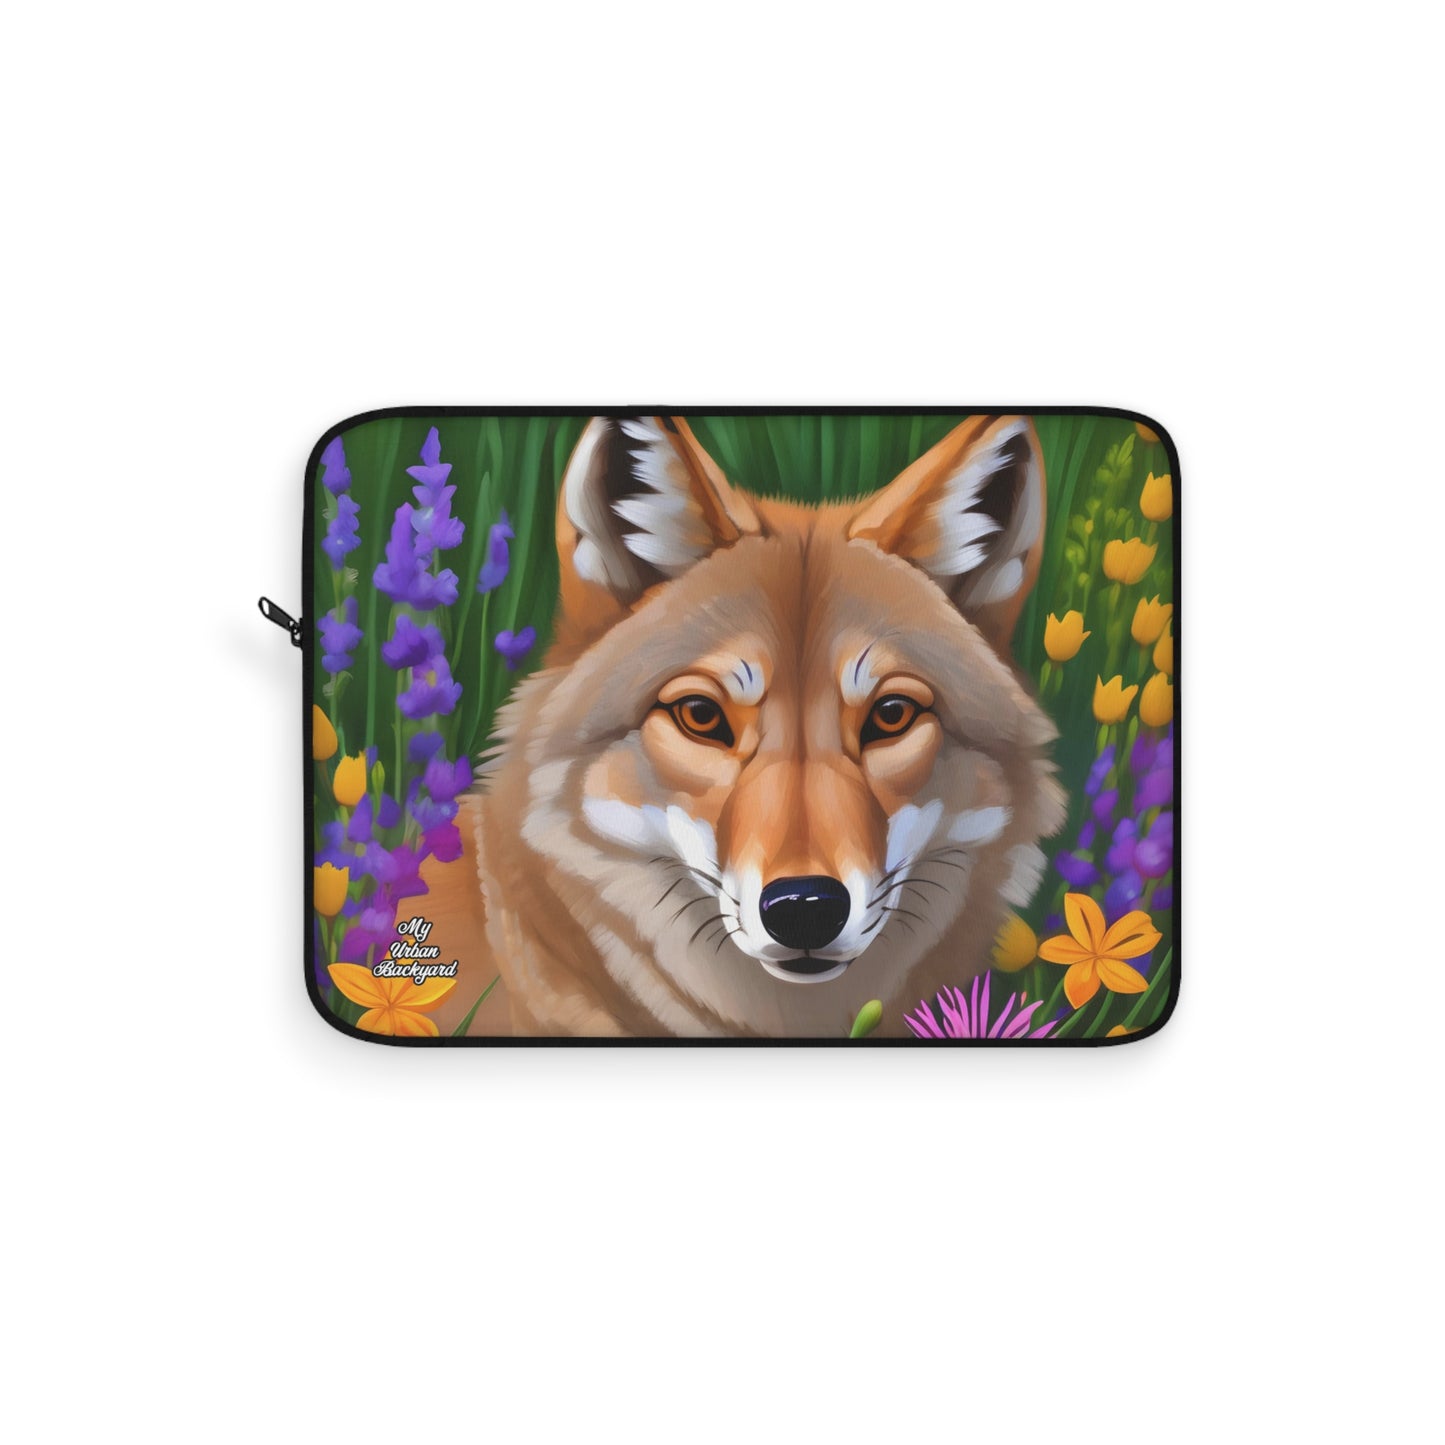 Coyote with Flowers, Laptop Carrying Case, Top Loading Sleeve for School or Work